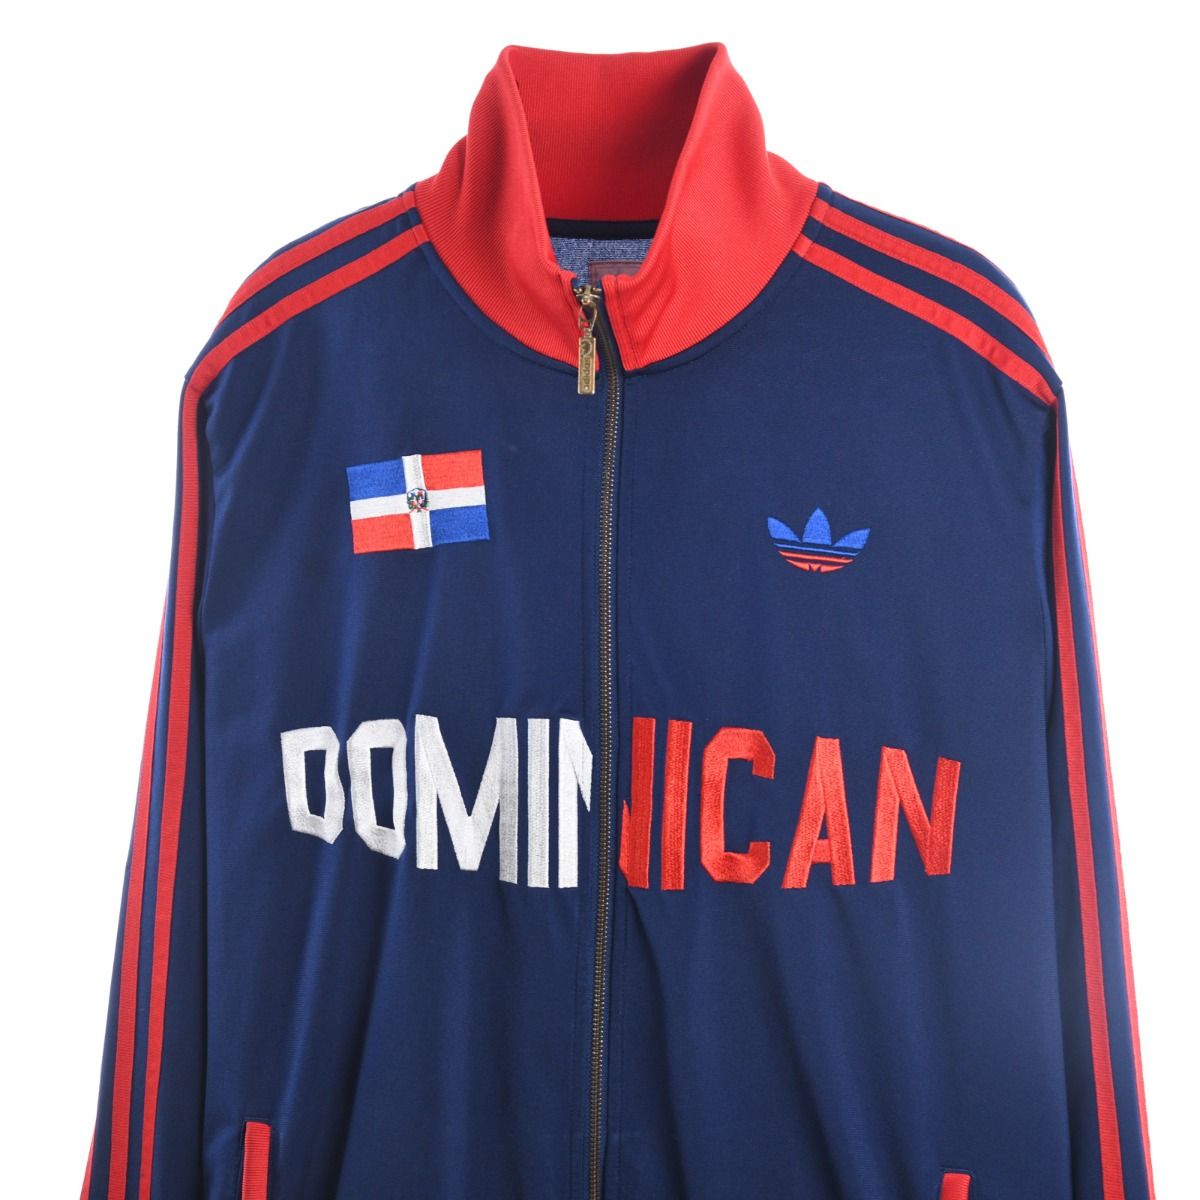 Adidas Early 2000s Dominican Track Jacket